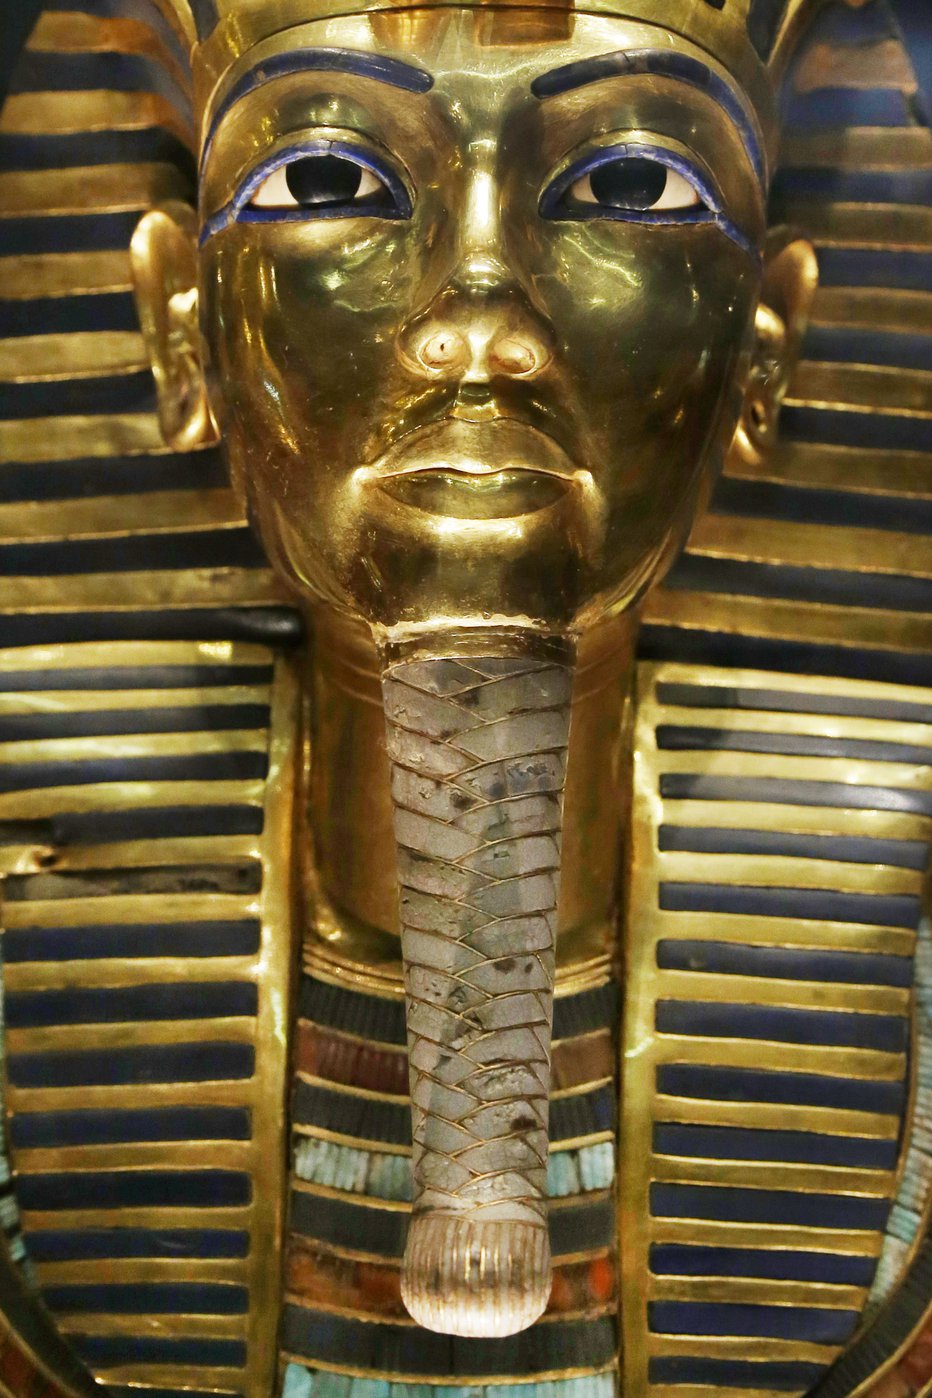 Fotografija: FILE - In this Saturday, Jan. 24, 2015 file photo, The gold mask of King Tutankhamun is seen in a glass case during a press tour, in the Egyptian Museum near Tahrir Square, Cairo. Egyptian prosecutors have referred to trial eight restorers involved in the botched repair of the famed golden burial mask of King Tut, which was corrected late last year. (AP Photo/Hassan Ammar, File) FOTO: Hassan Ammar Ap